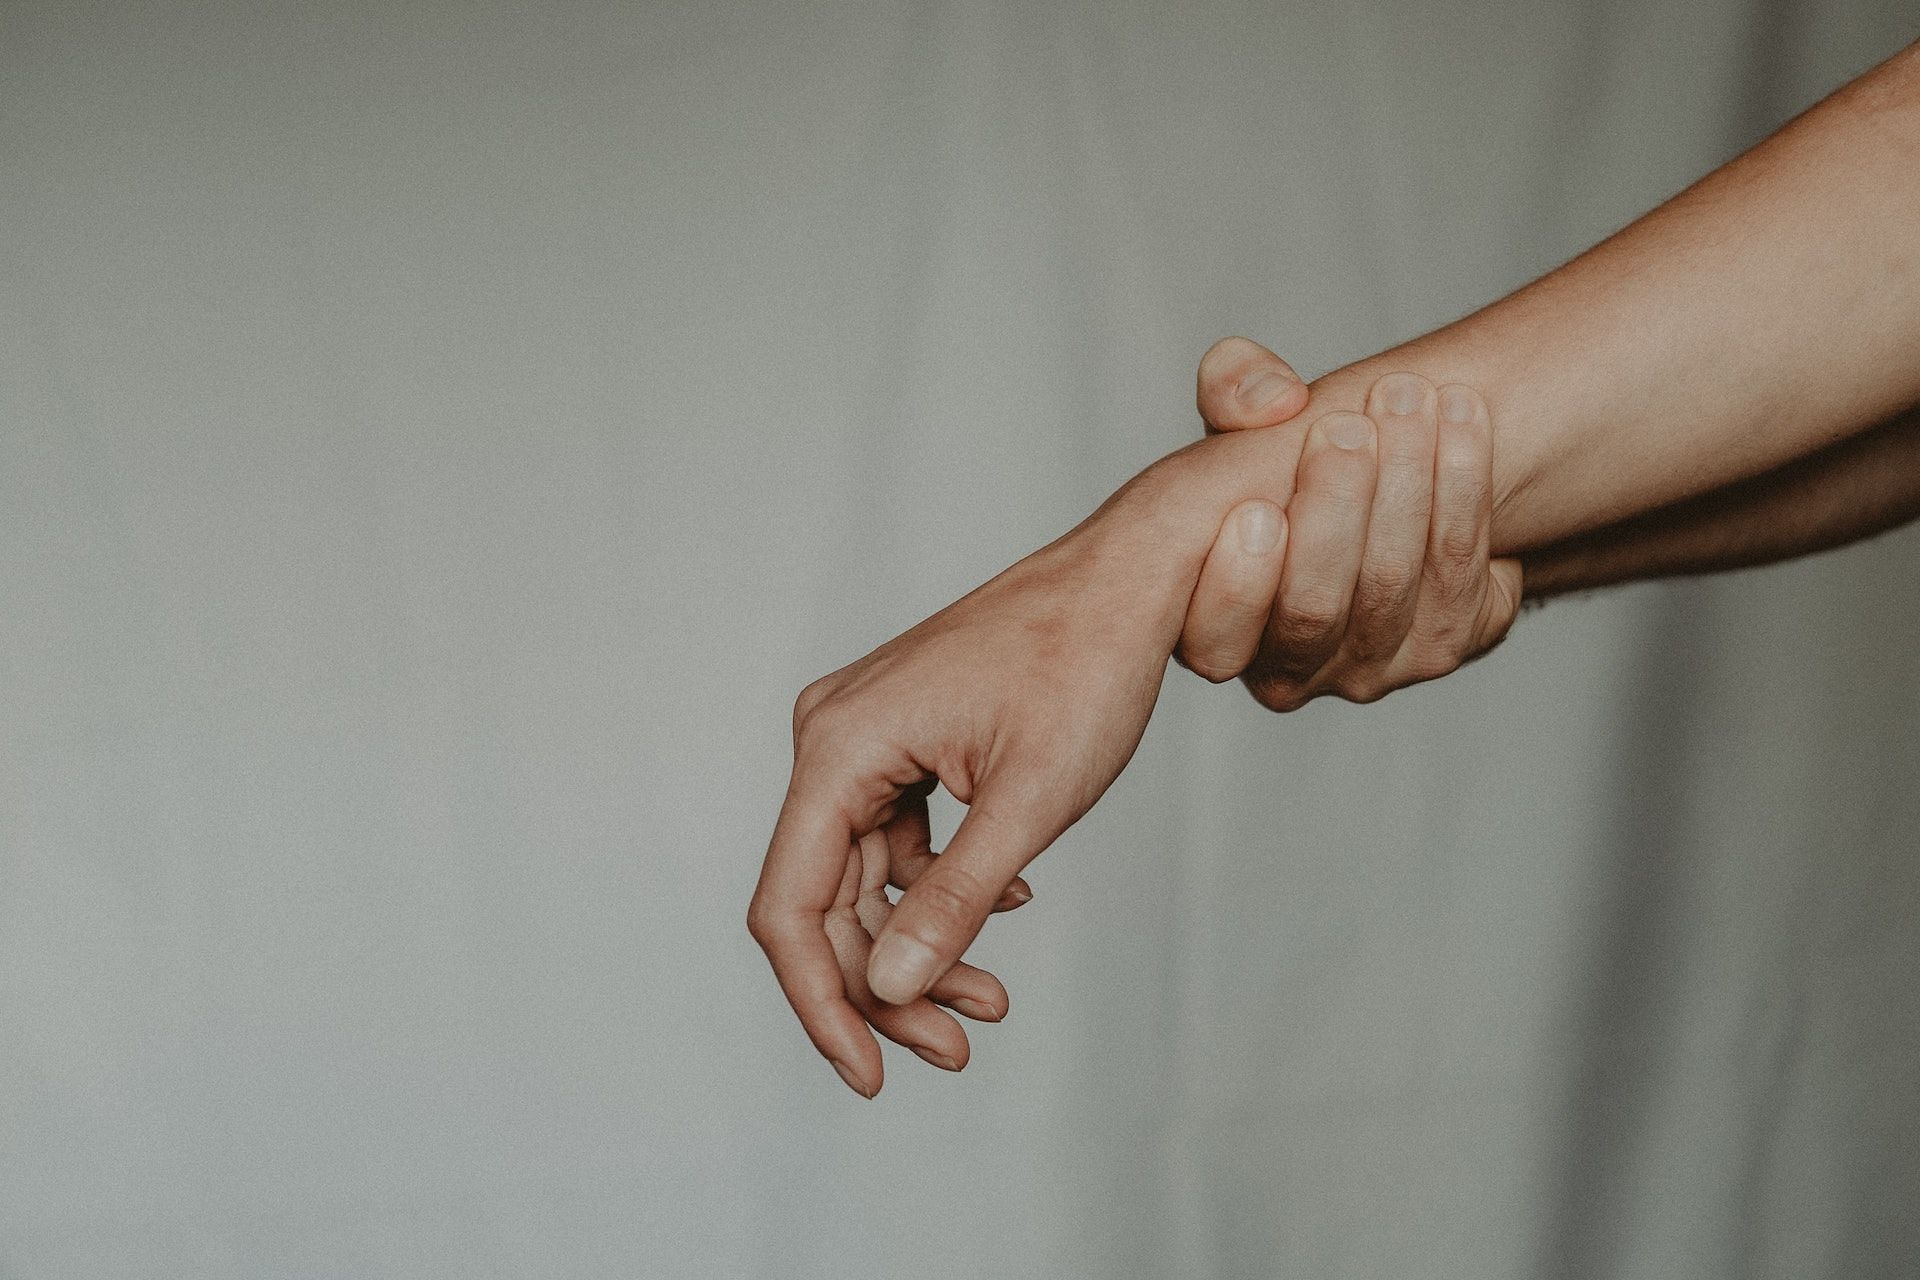 Carpal tunnel syndrome can lead to tingling in hands. (Photo via Pexels/Anete Lusina)